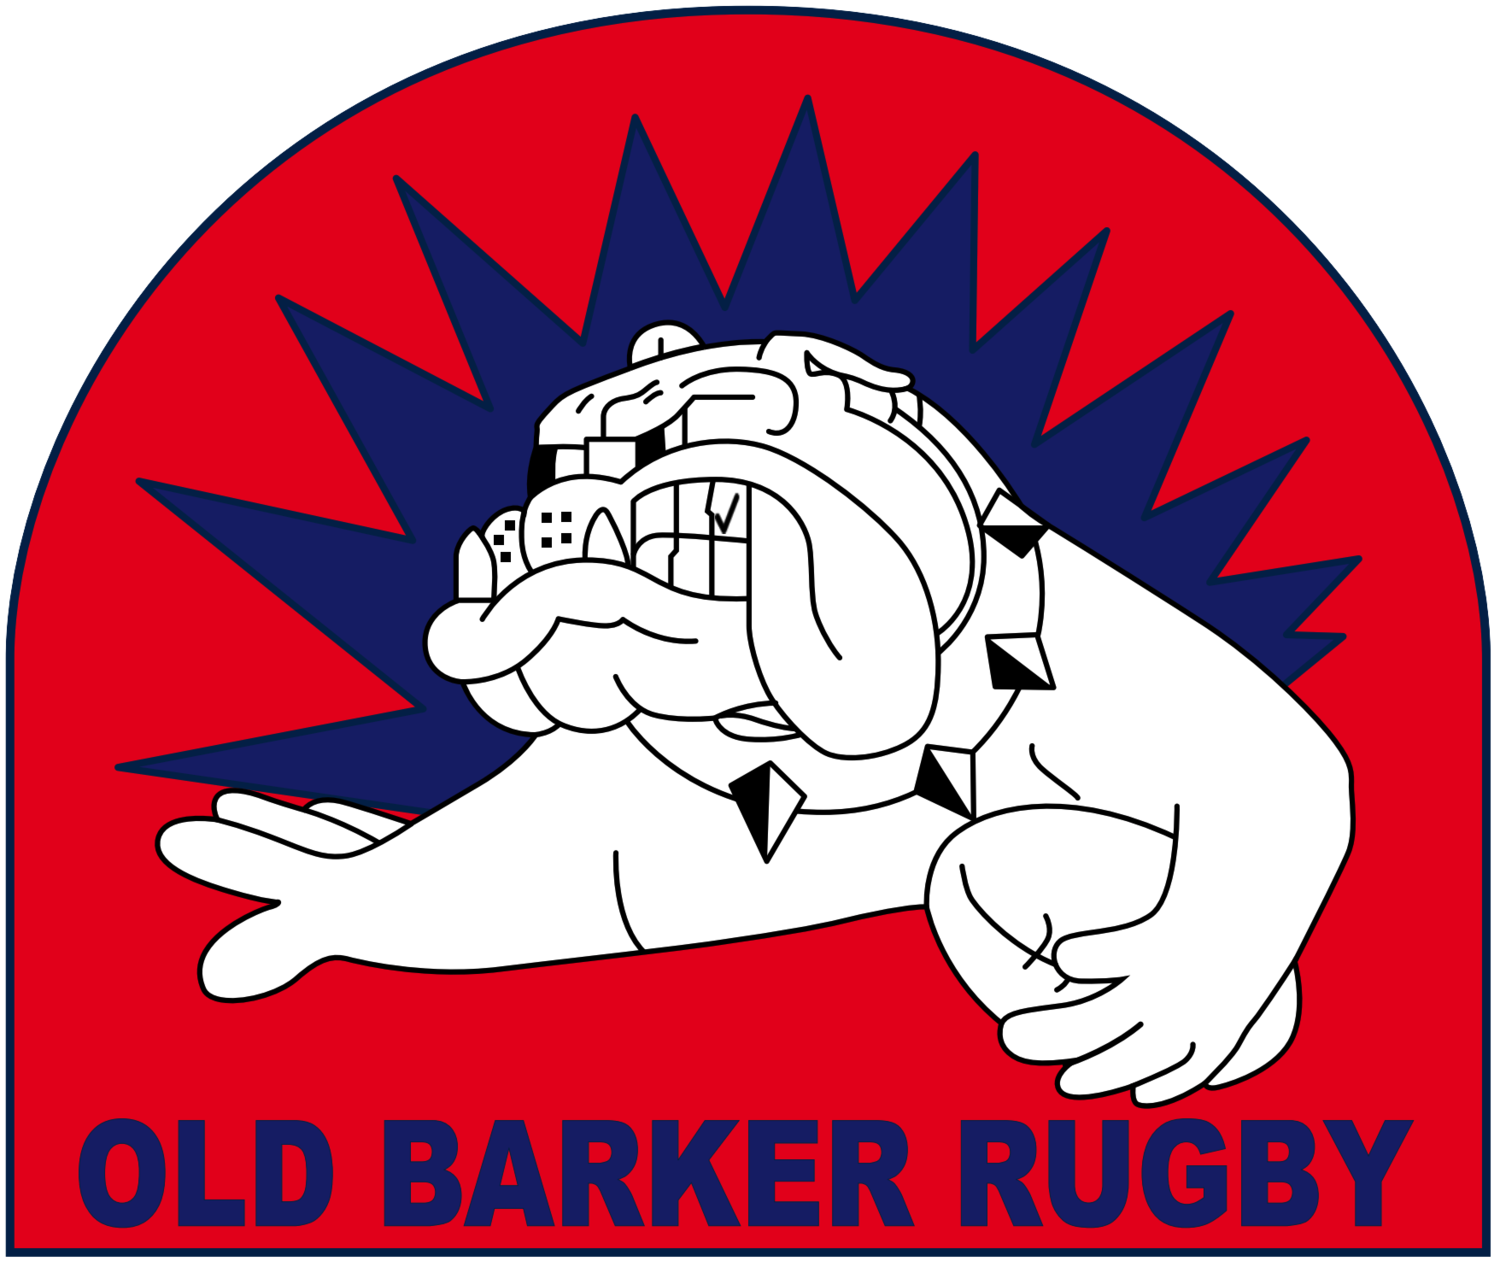 Old Barker Rugby Club